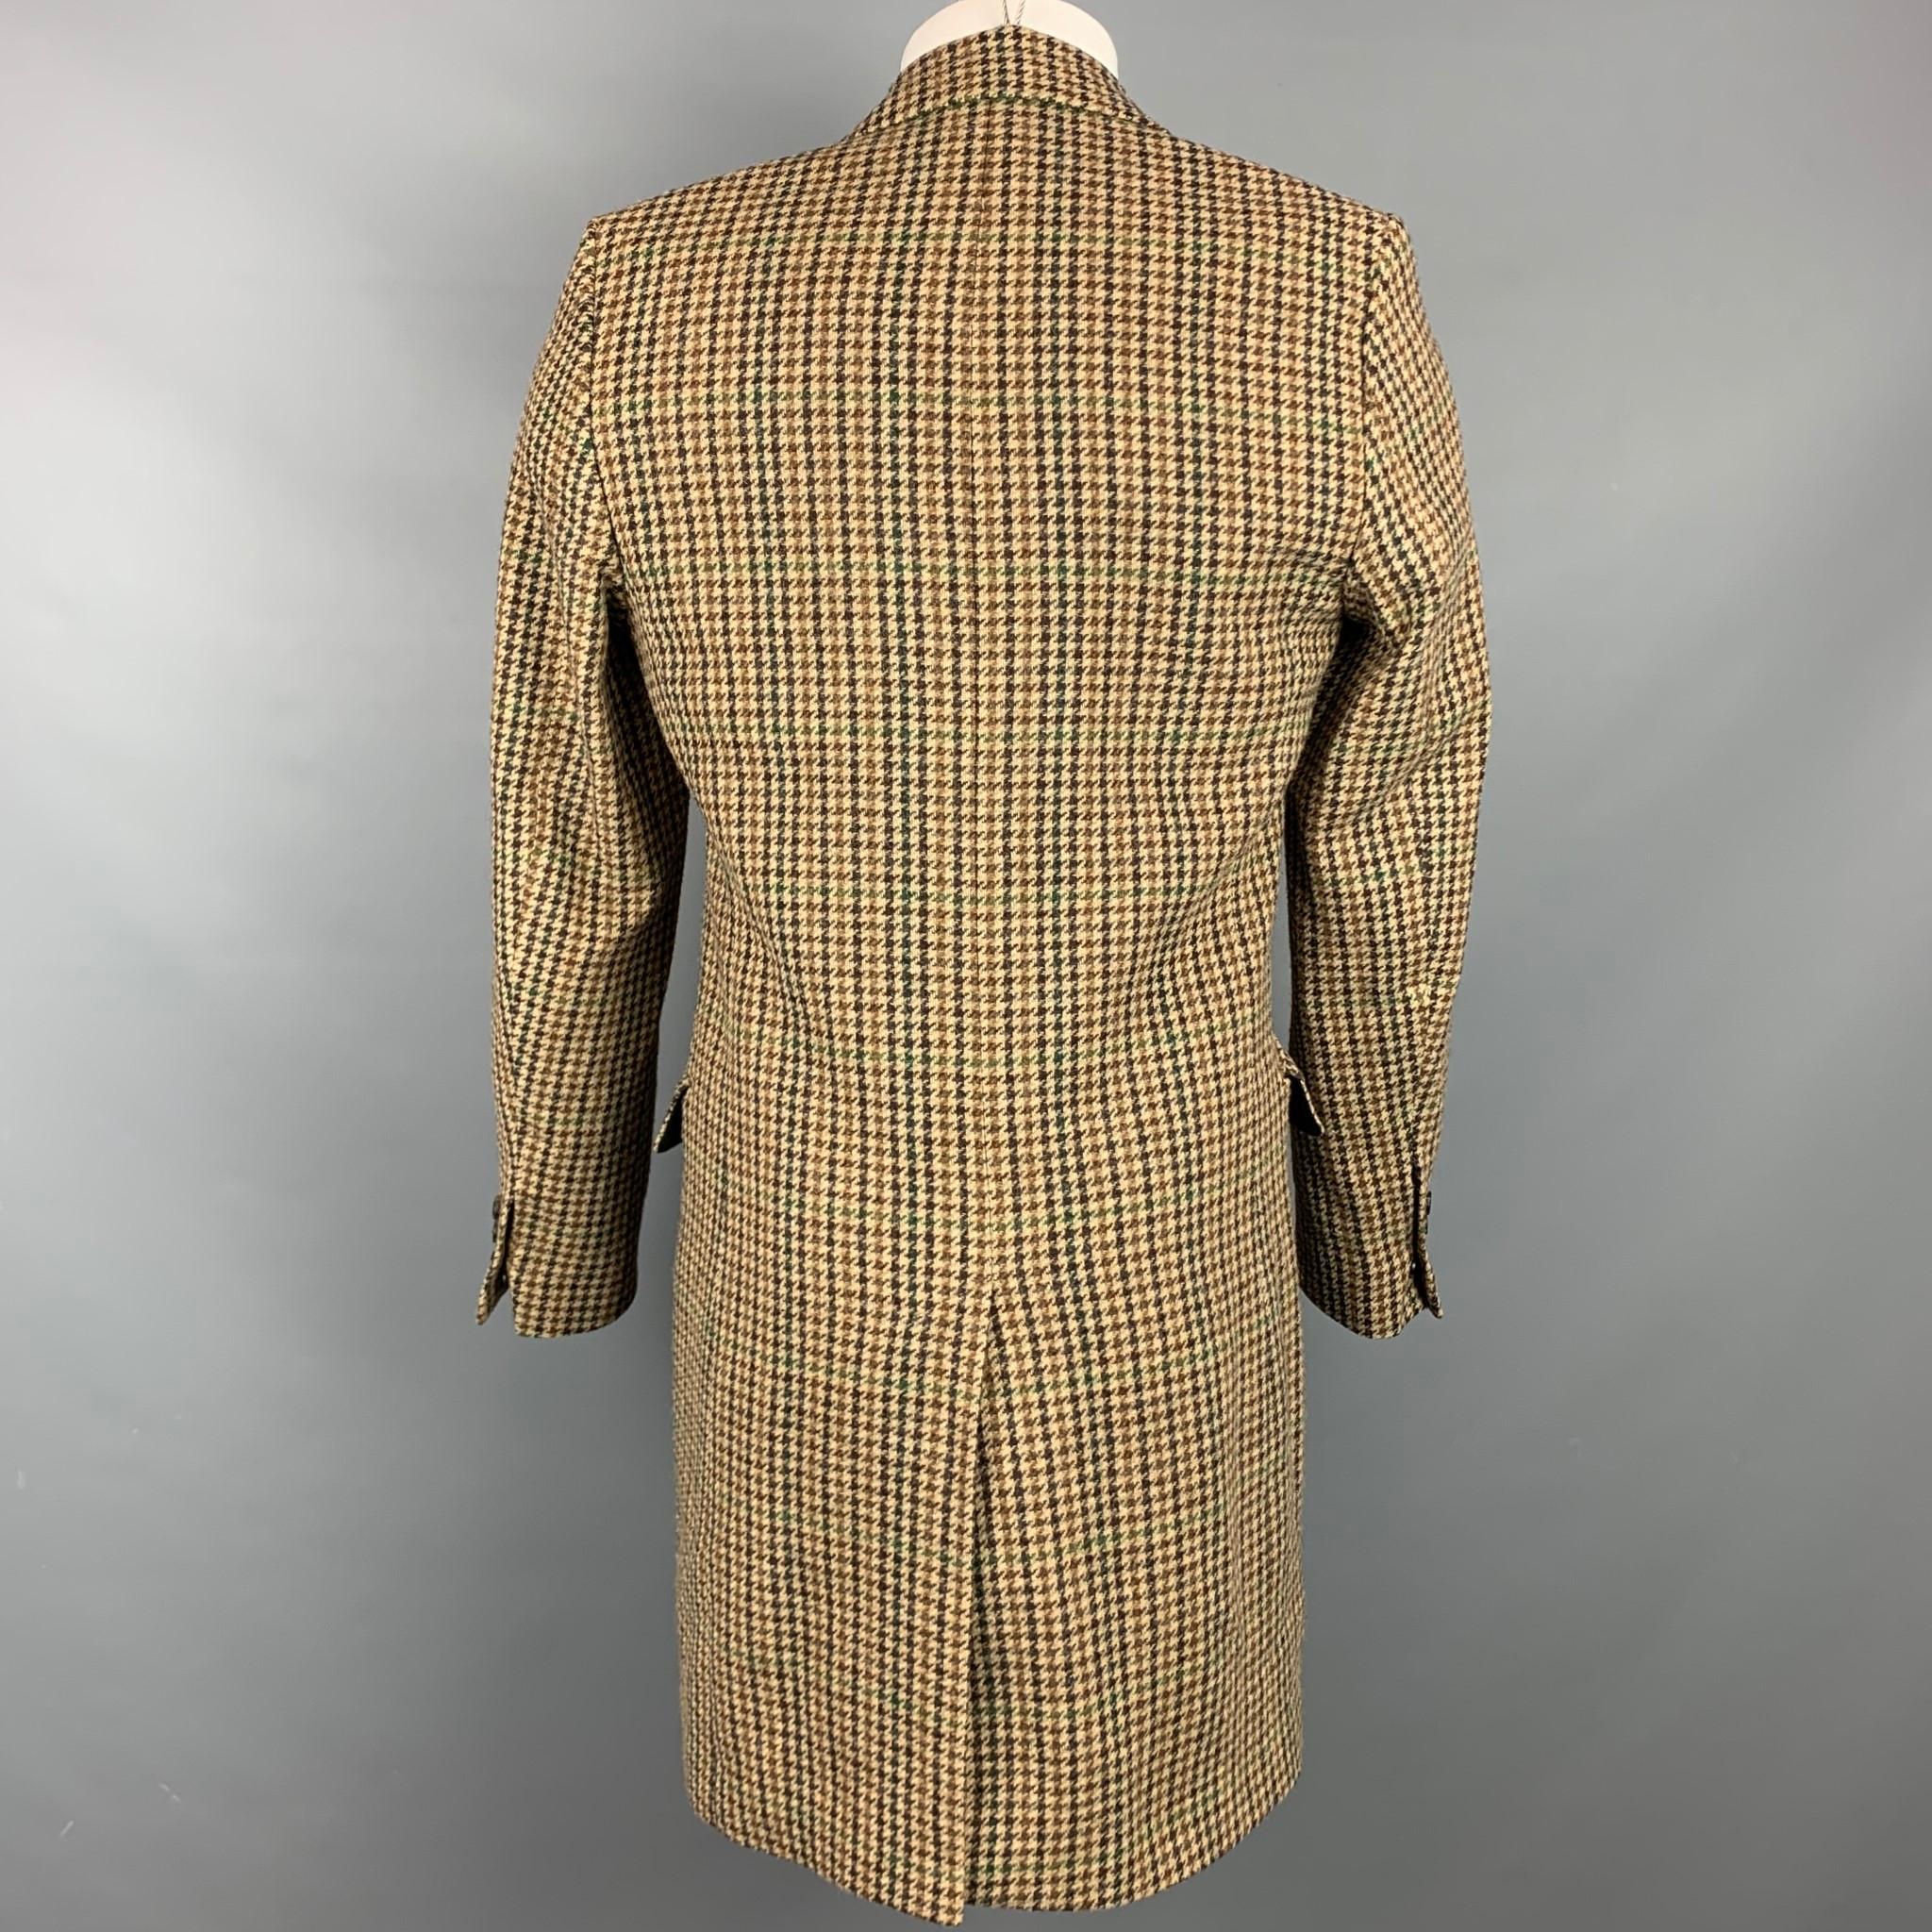 AMI by ALEXANDRE MATTIUSSI coat comes in a tan & brown plaid wool with a full liner featuring a notch lapel, flap pockets, and a two button closure. 

Very Good Pre-Owned Condition.
Marked: FR 50

Measurements:

Shoulder: 16.5 in.
Chest: 40